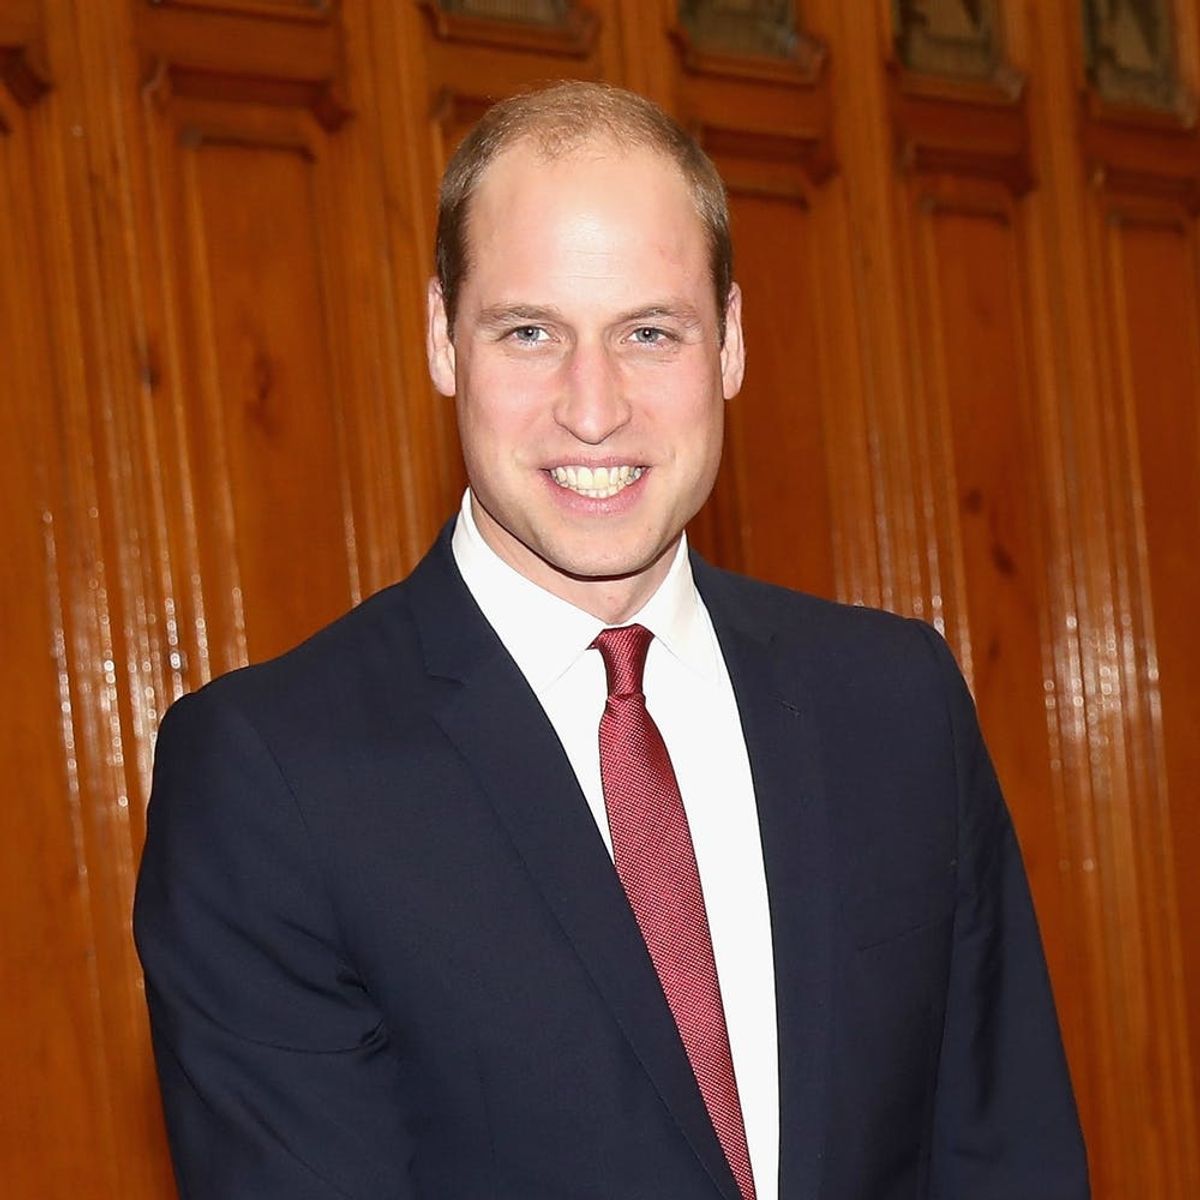 Prince William Just Made the Most Relatable Confession About Parenting